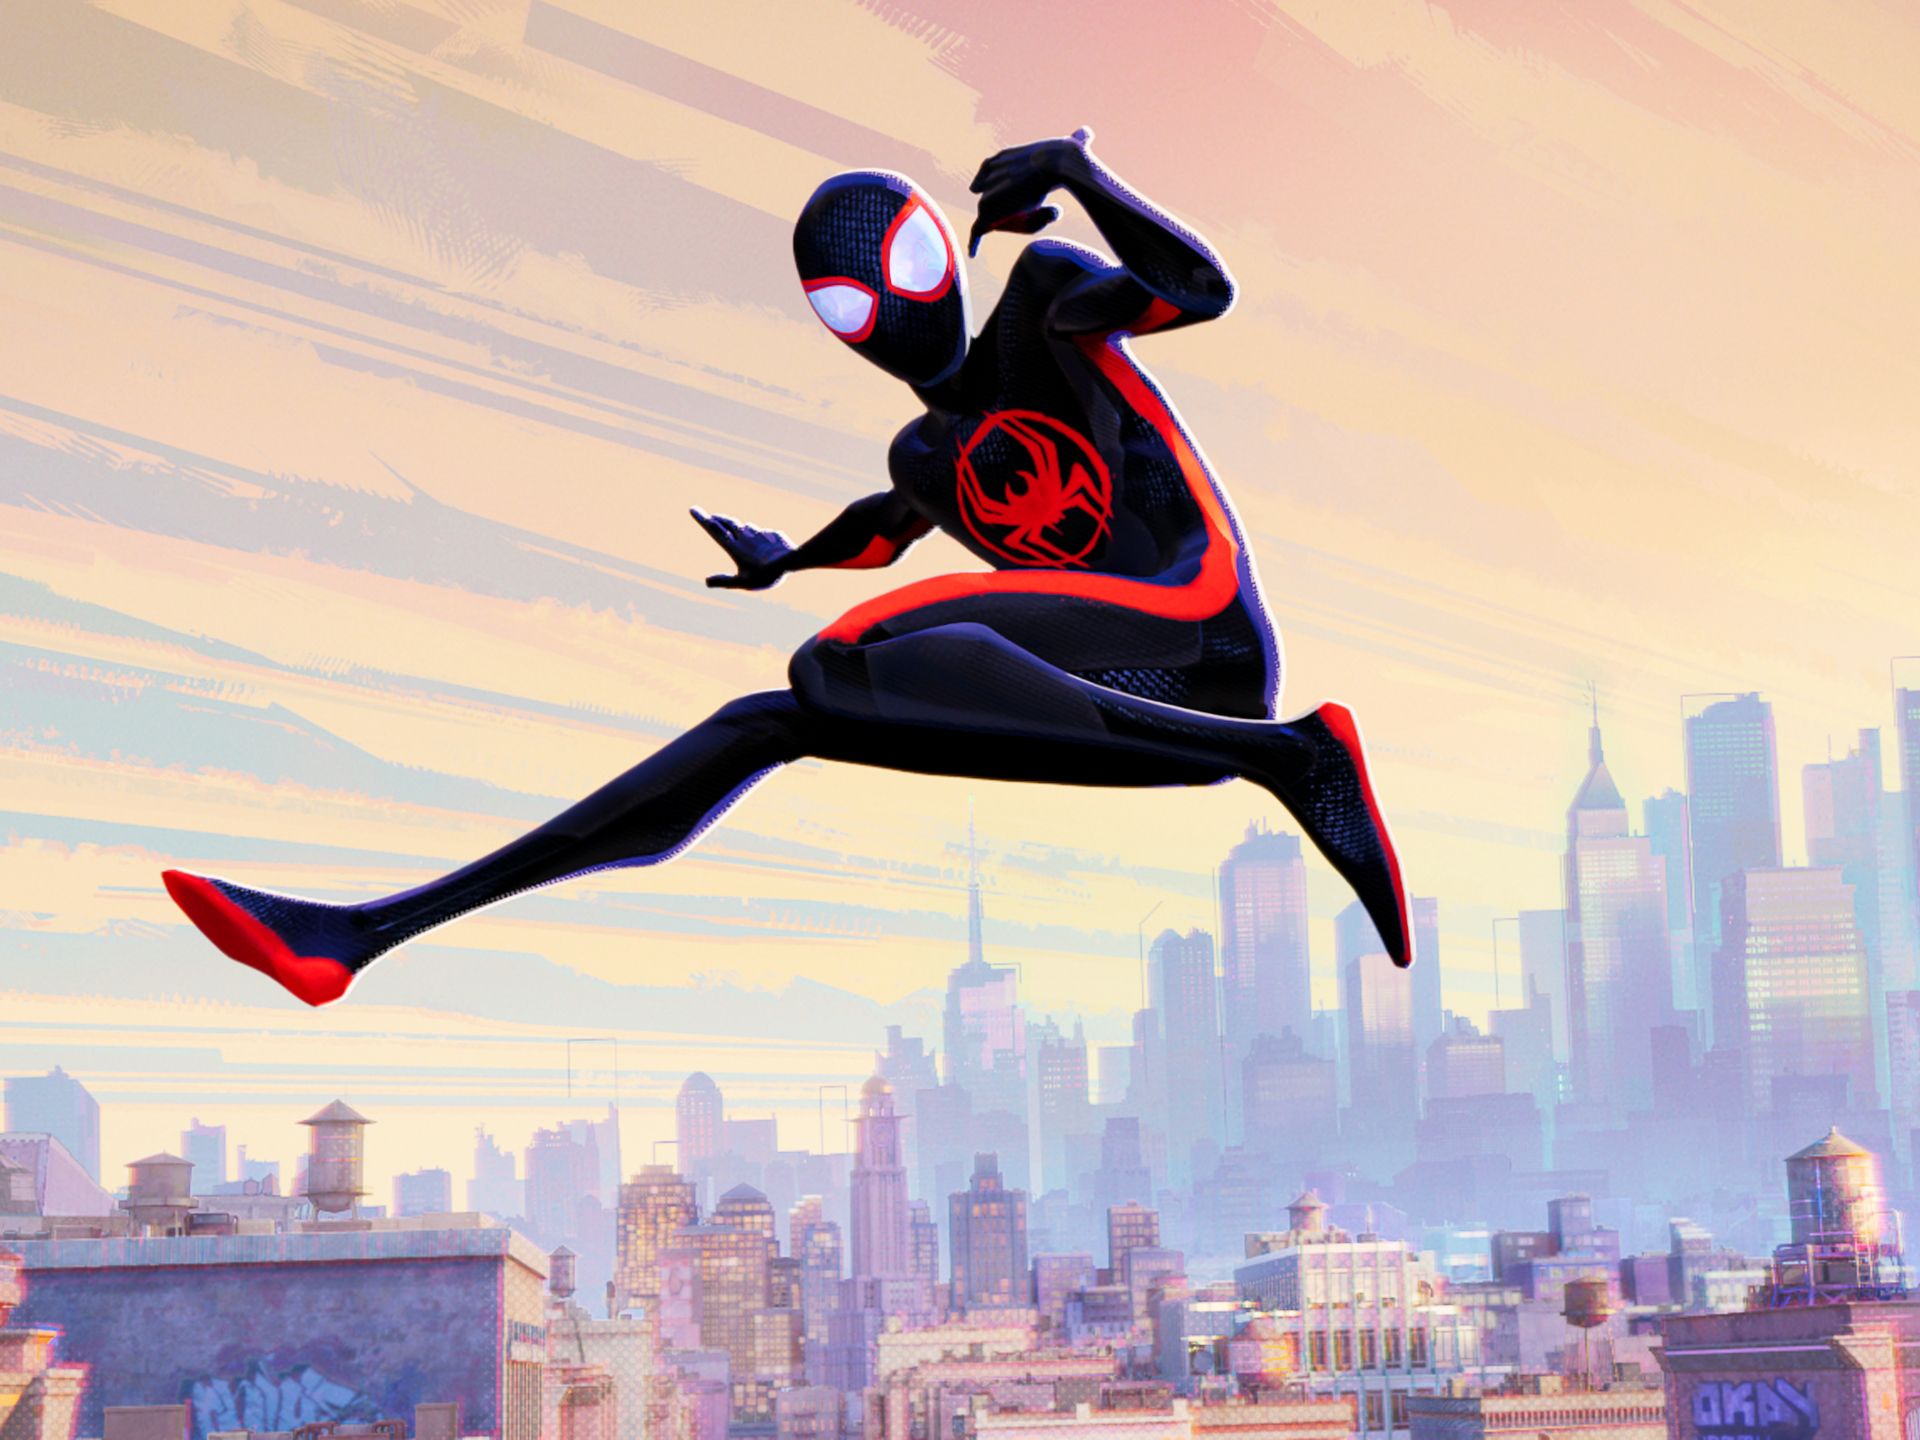 SEQUEL: Spider-Man’s back for another animated adventure in the Spider-Verse